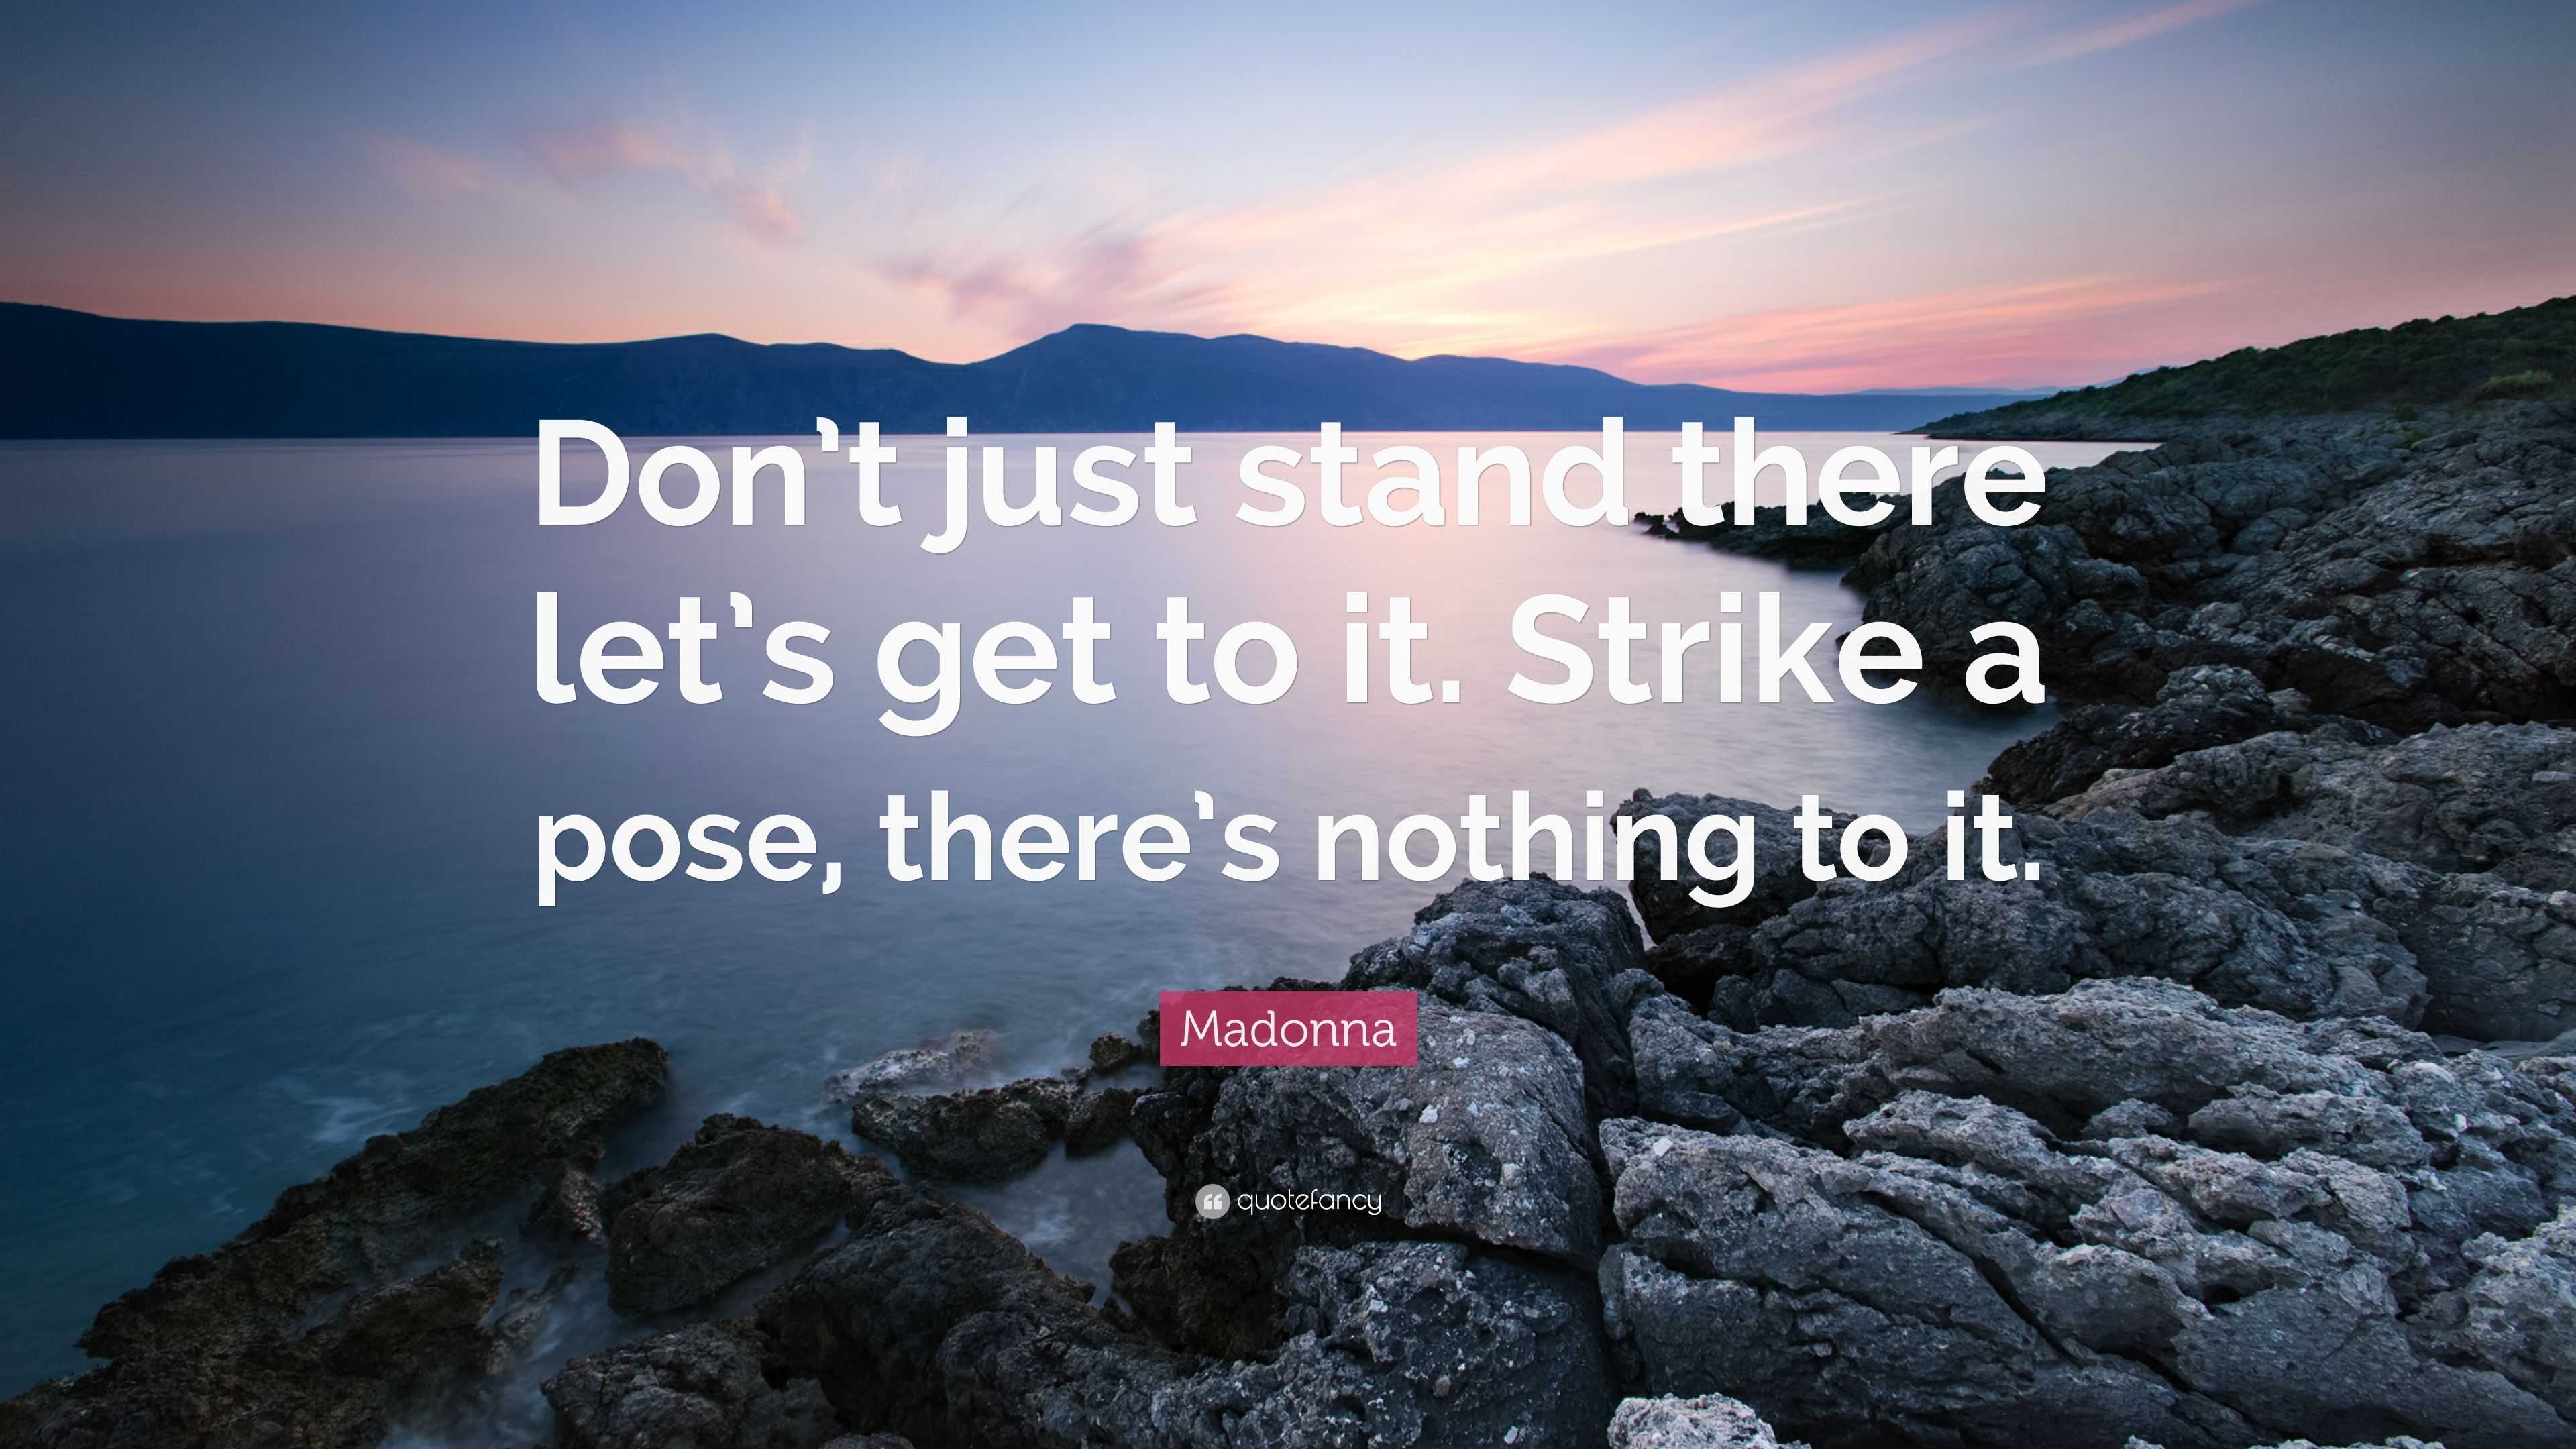 2245542 Madonna Quote Don t just stand there let s get to it Strike a pose